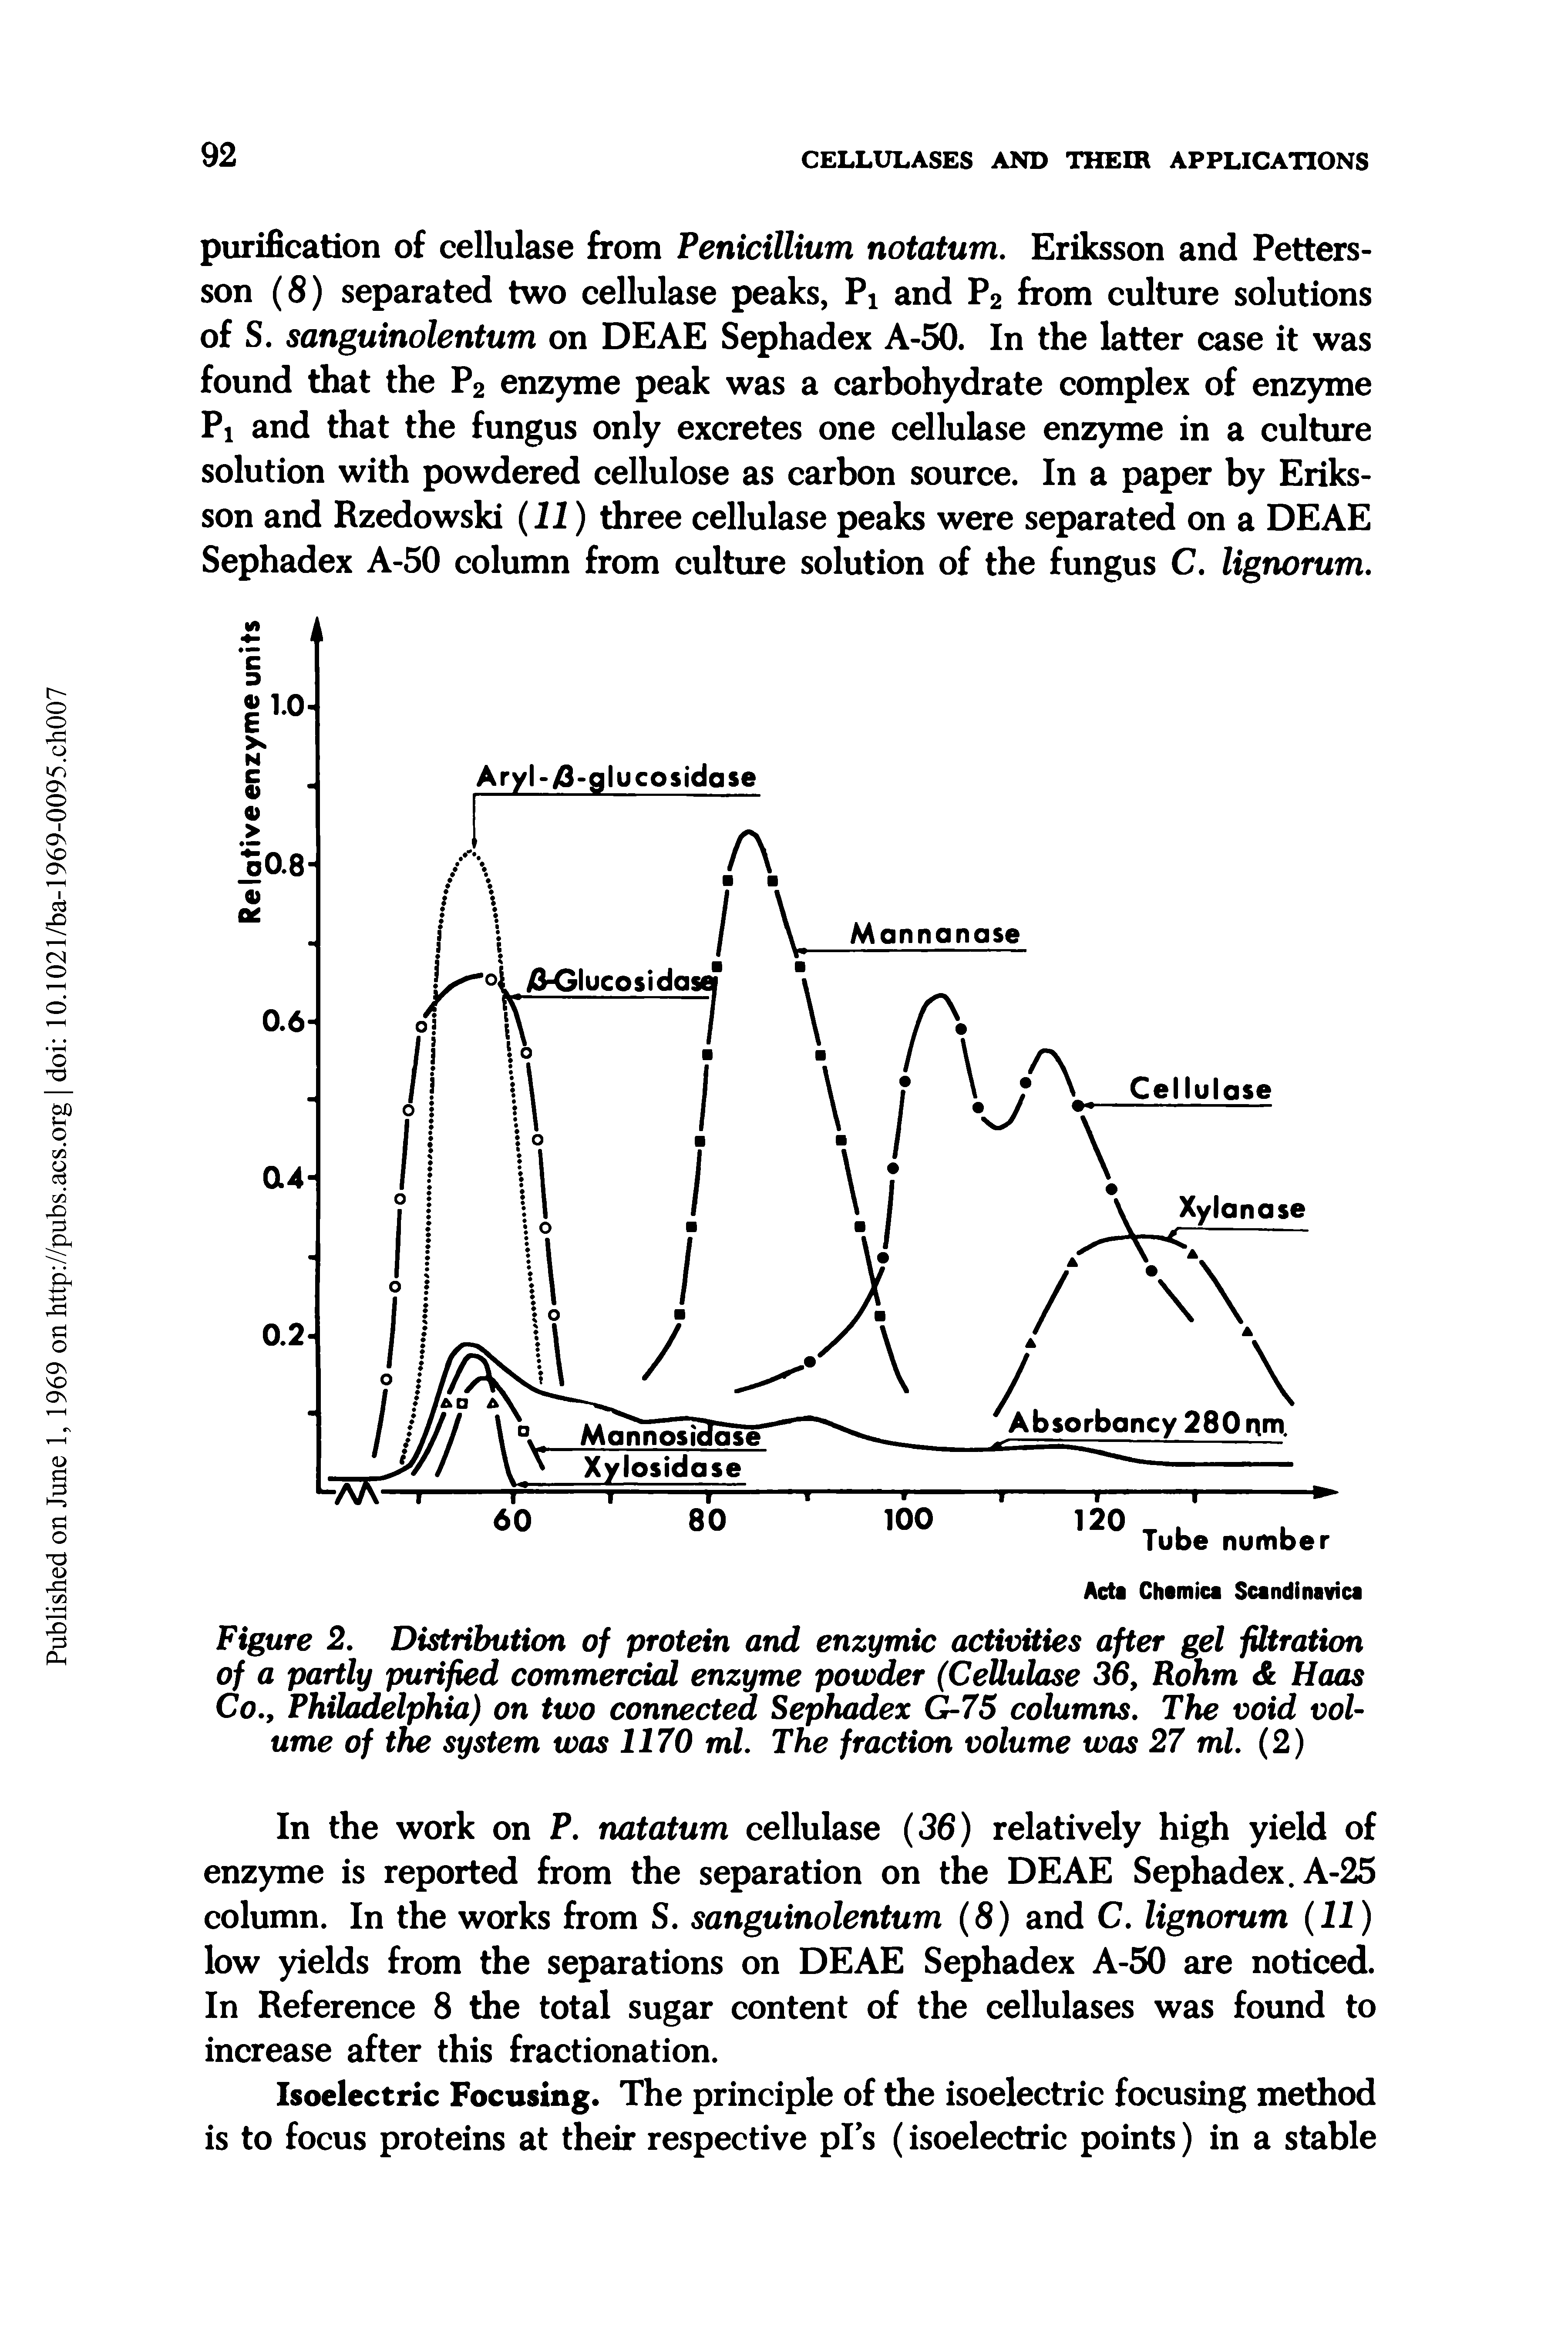 Figure 2. Distribution of protein and enzymic activities after gel filtration of a partly purified commercial enzyme powder (Cellulose 36, Rohm Haas Co., Philadelphia) on two connected Sephadex G-75 columns. The void volume of the system was 1170 ml. The fraction volume was 27 ml. (2)...